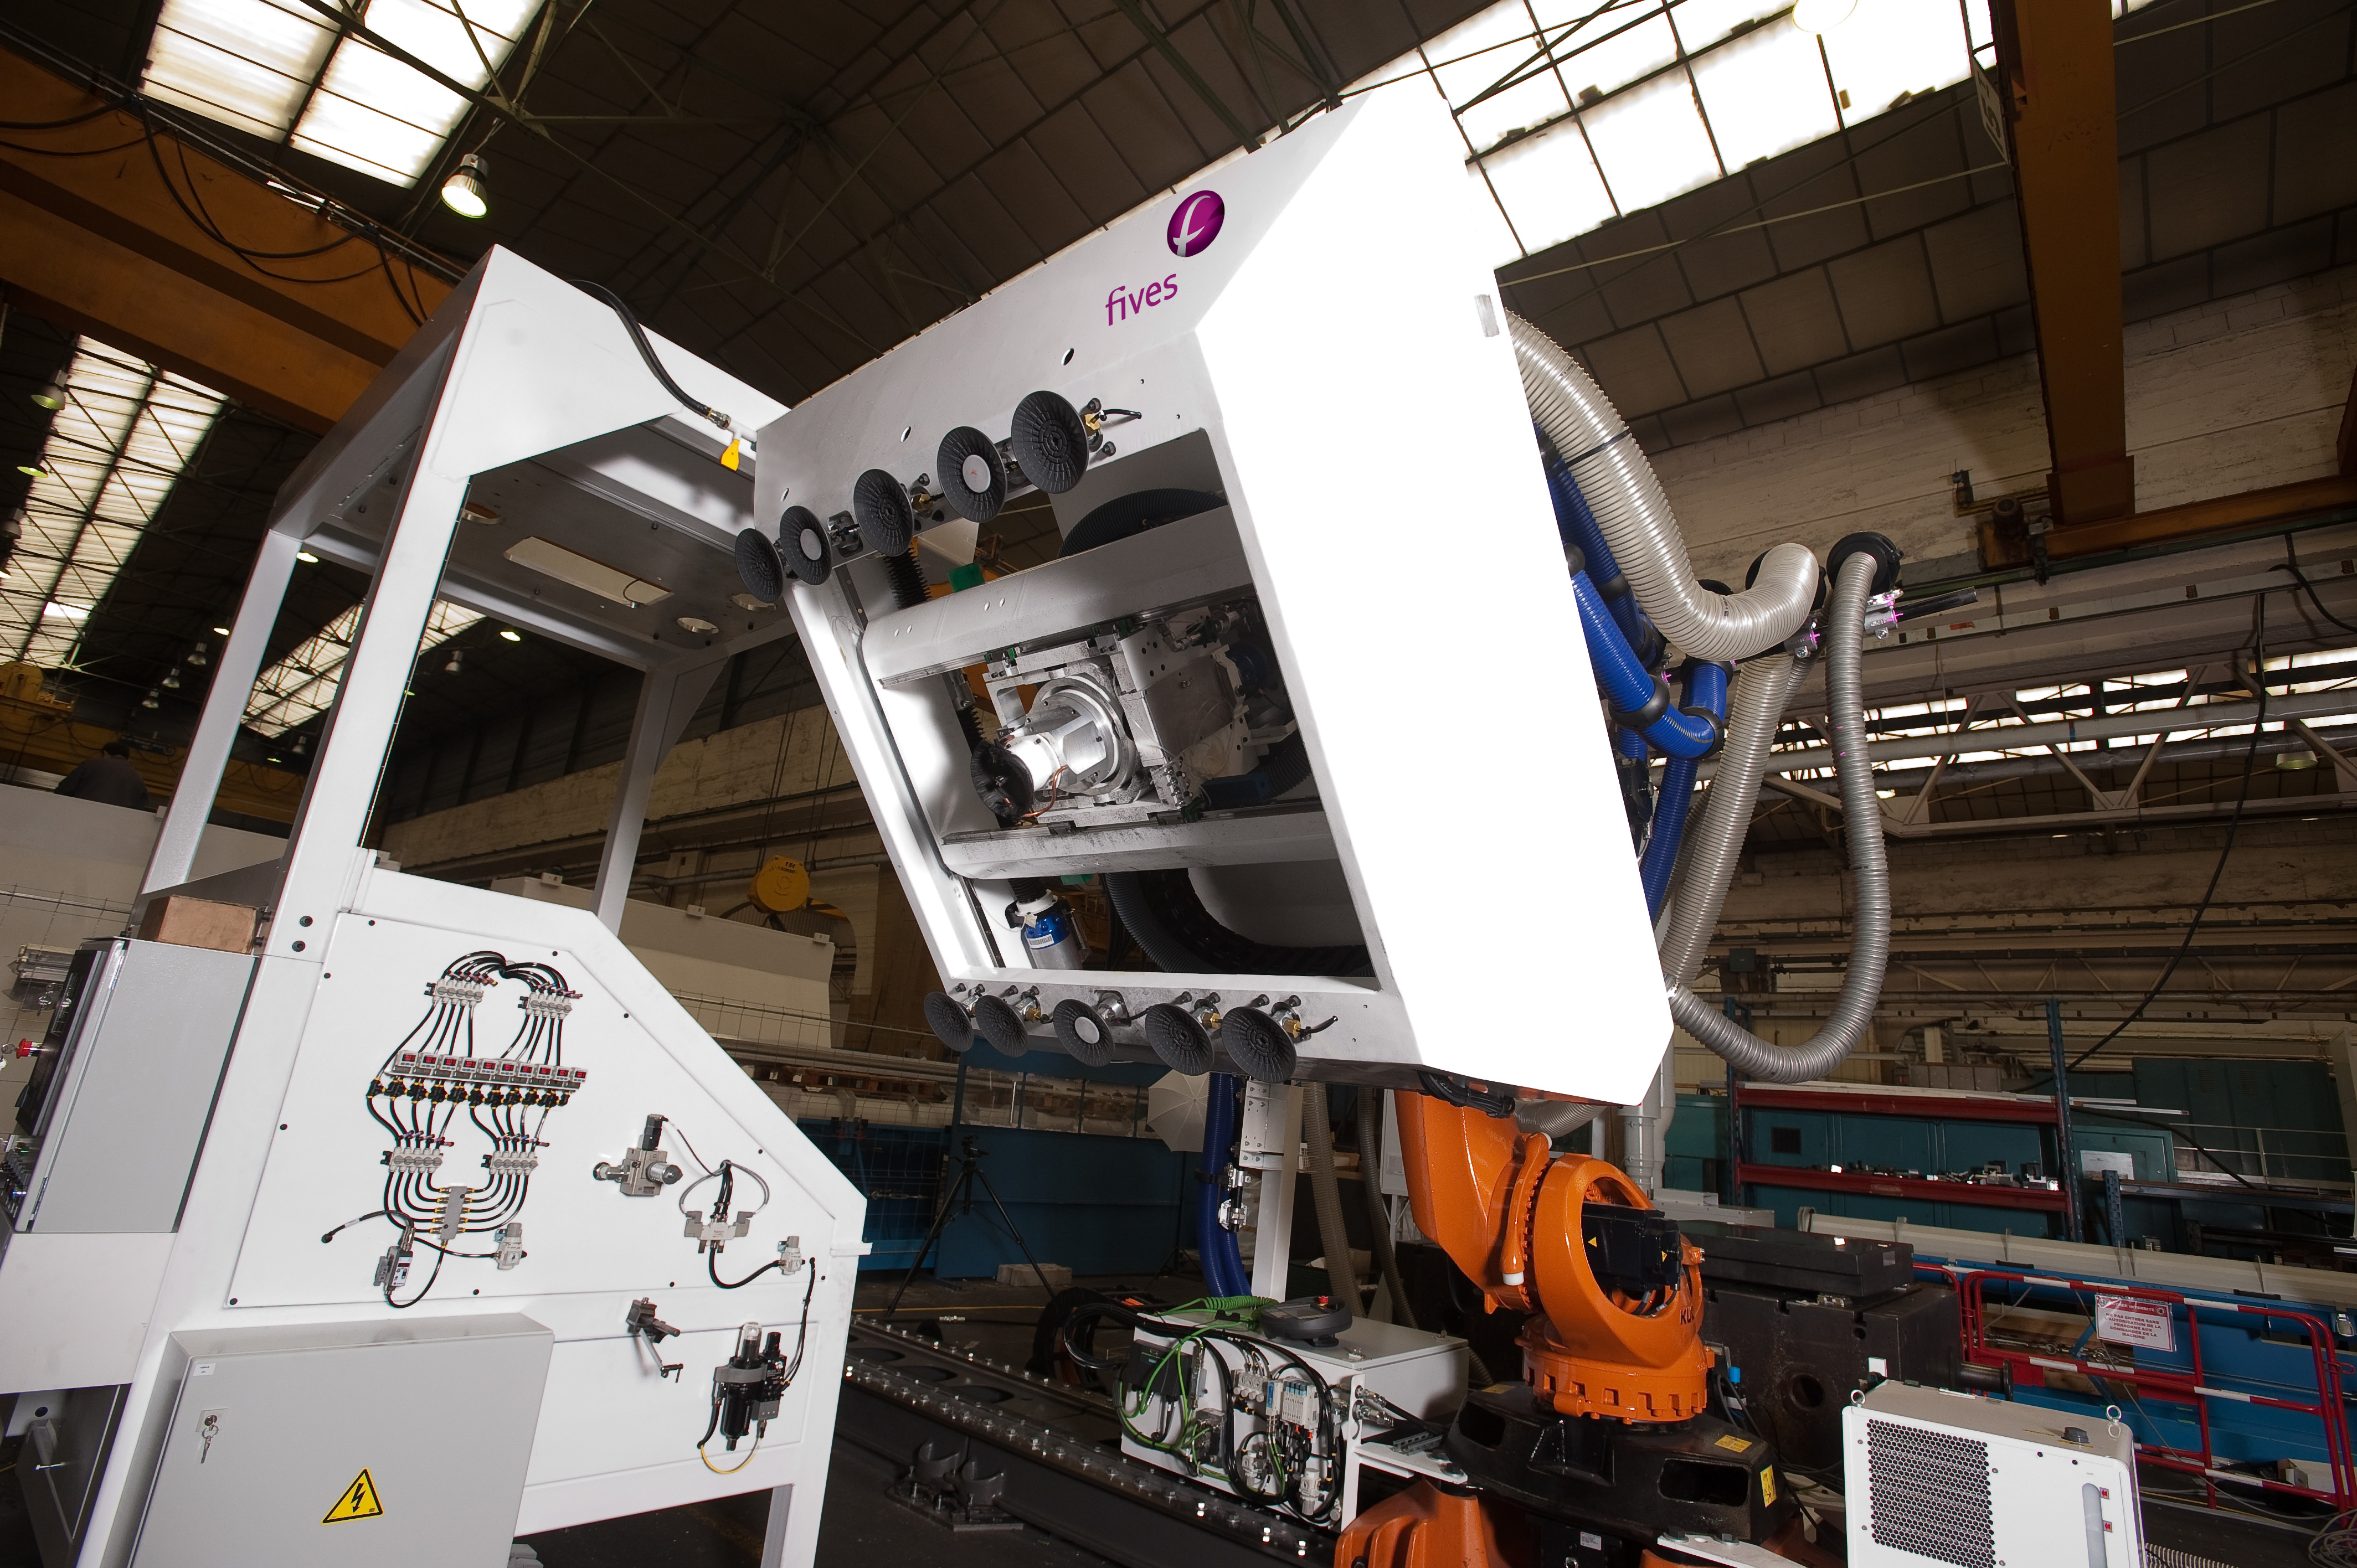 North American machine-tool builder Fives Liné Machines has launched Liné Machines Robotic to complement the company’s traditional, large machine tool solutions.